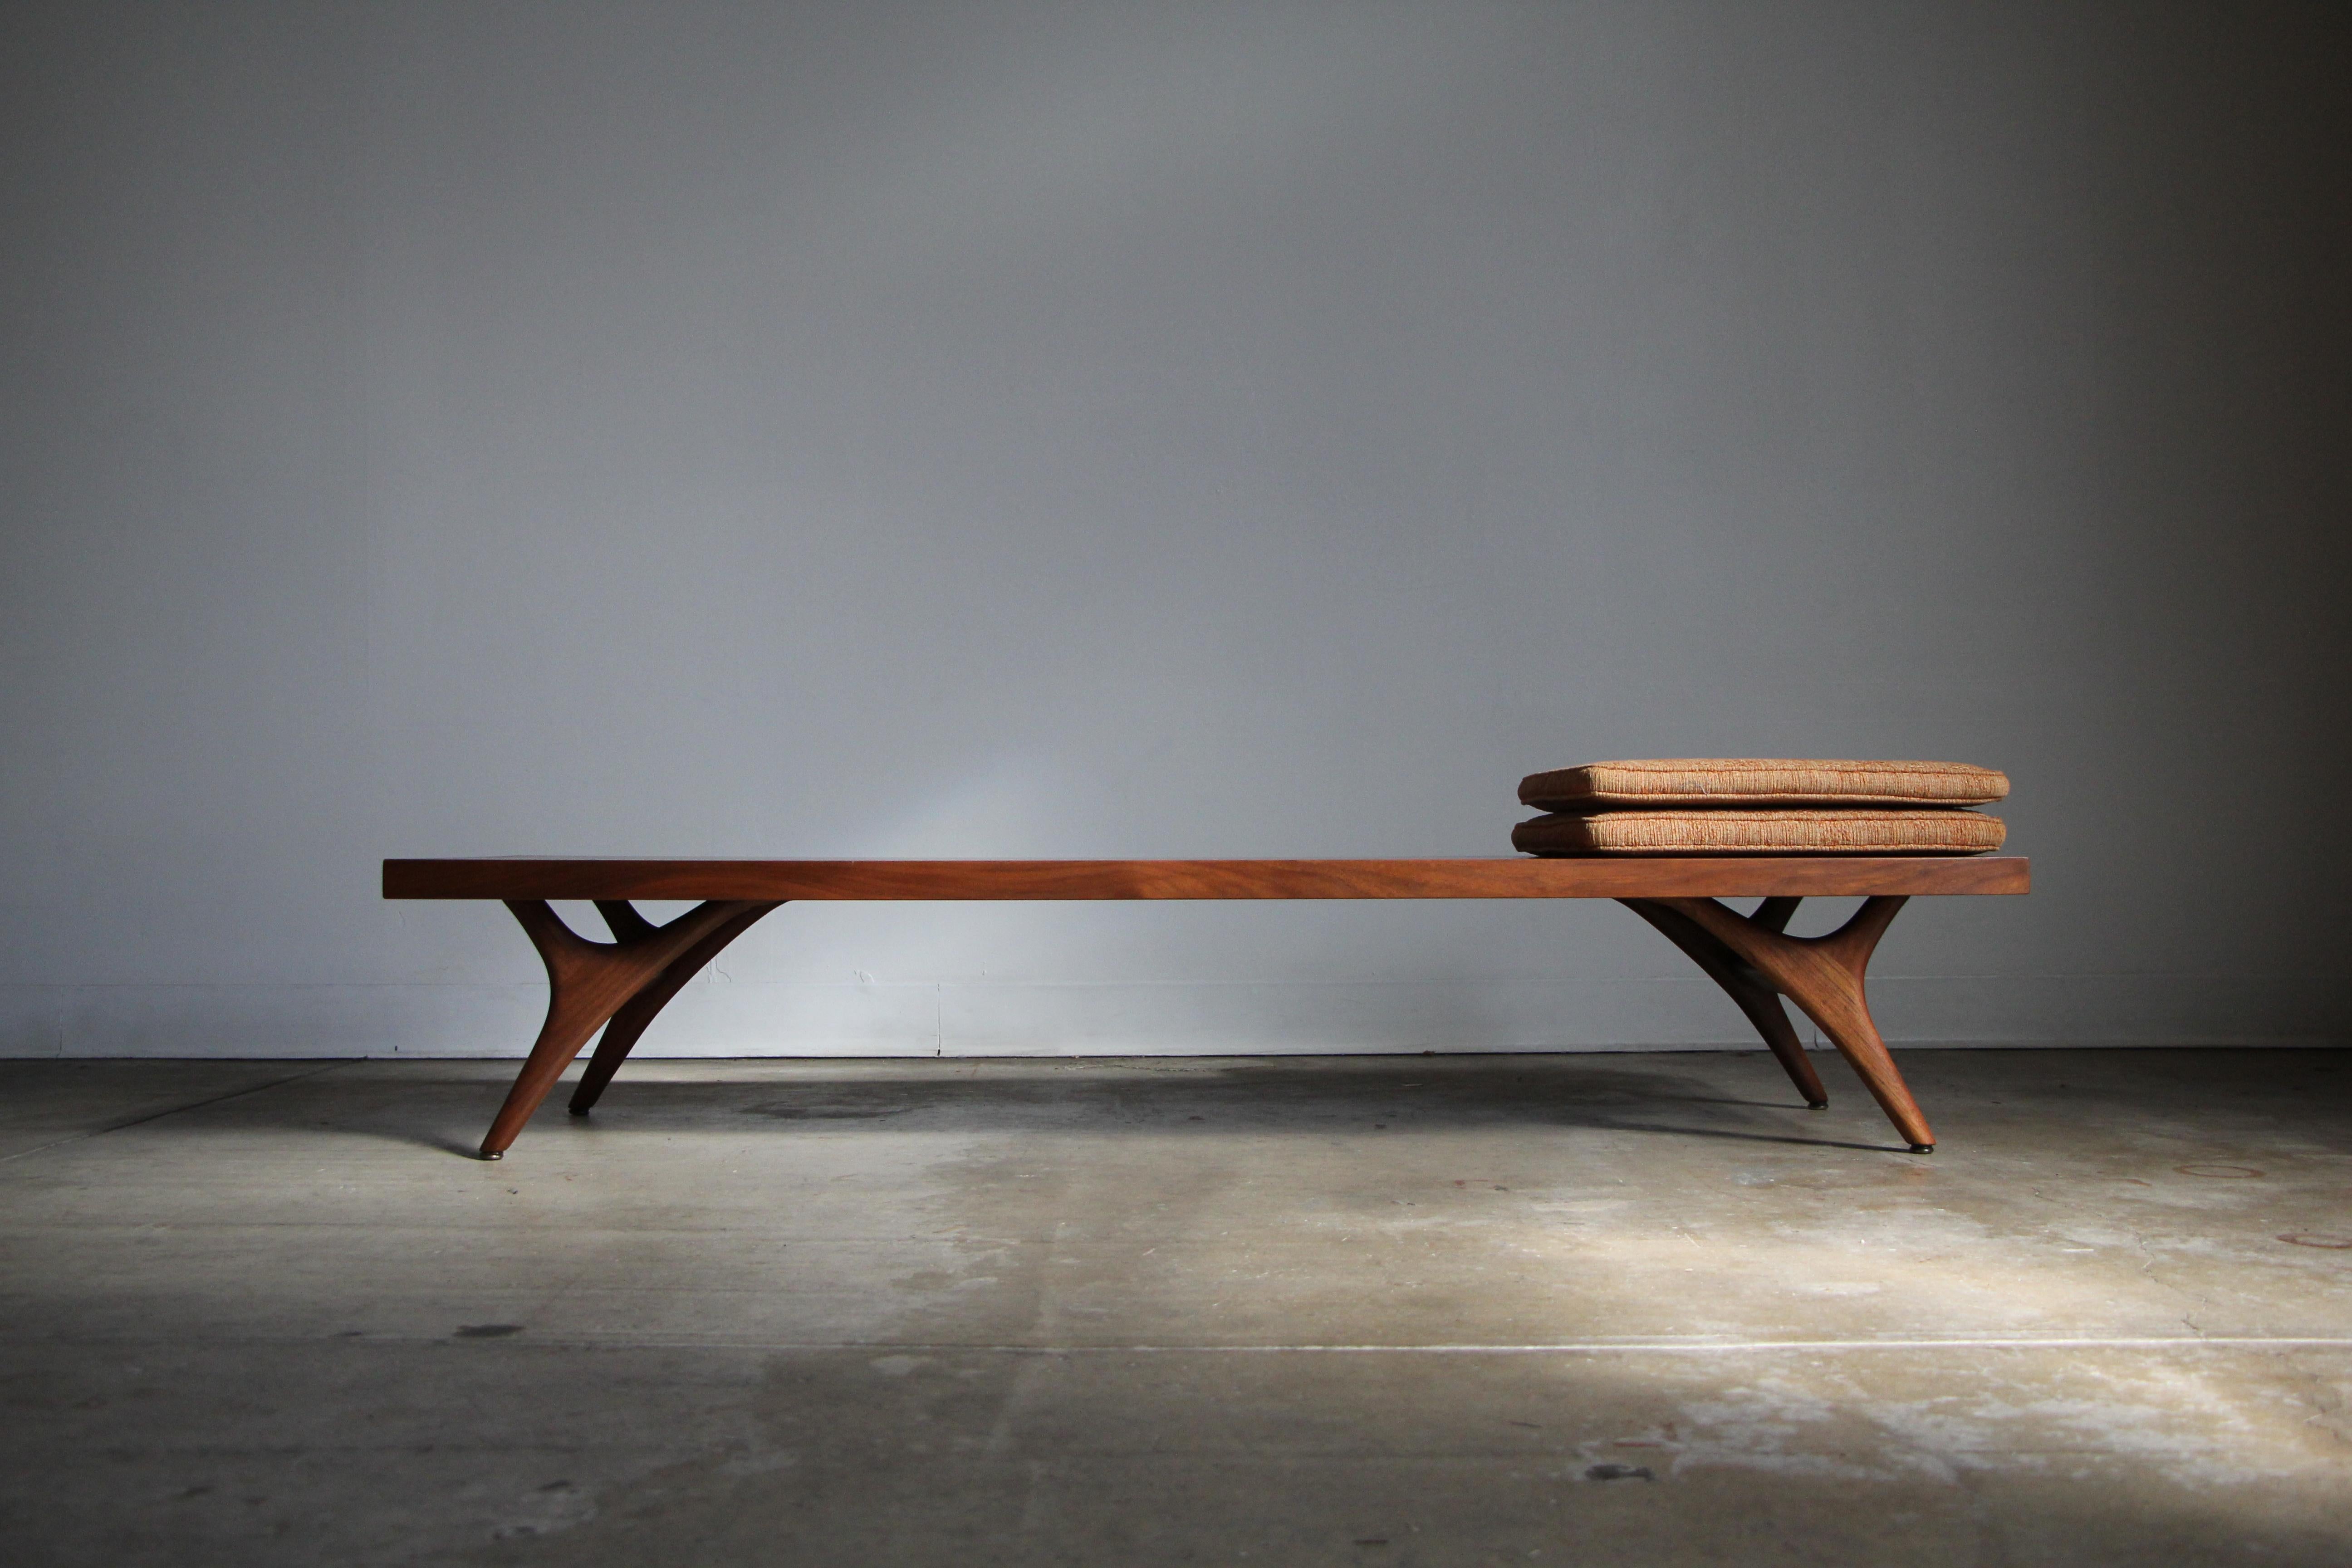 This rare low bench or coffee table was likely designed by Vladimir Kagan for Grosfeld House in the 1950s, though it is unmarked. The bench consists of a solid walnut top and four beautifully sculpted walnut legs, a hallmark detail of Kagan's early